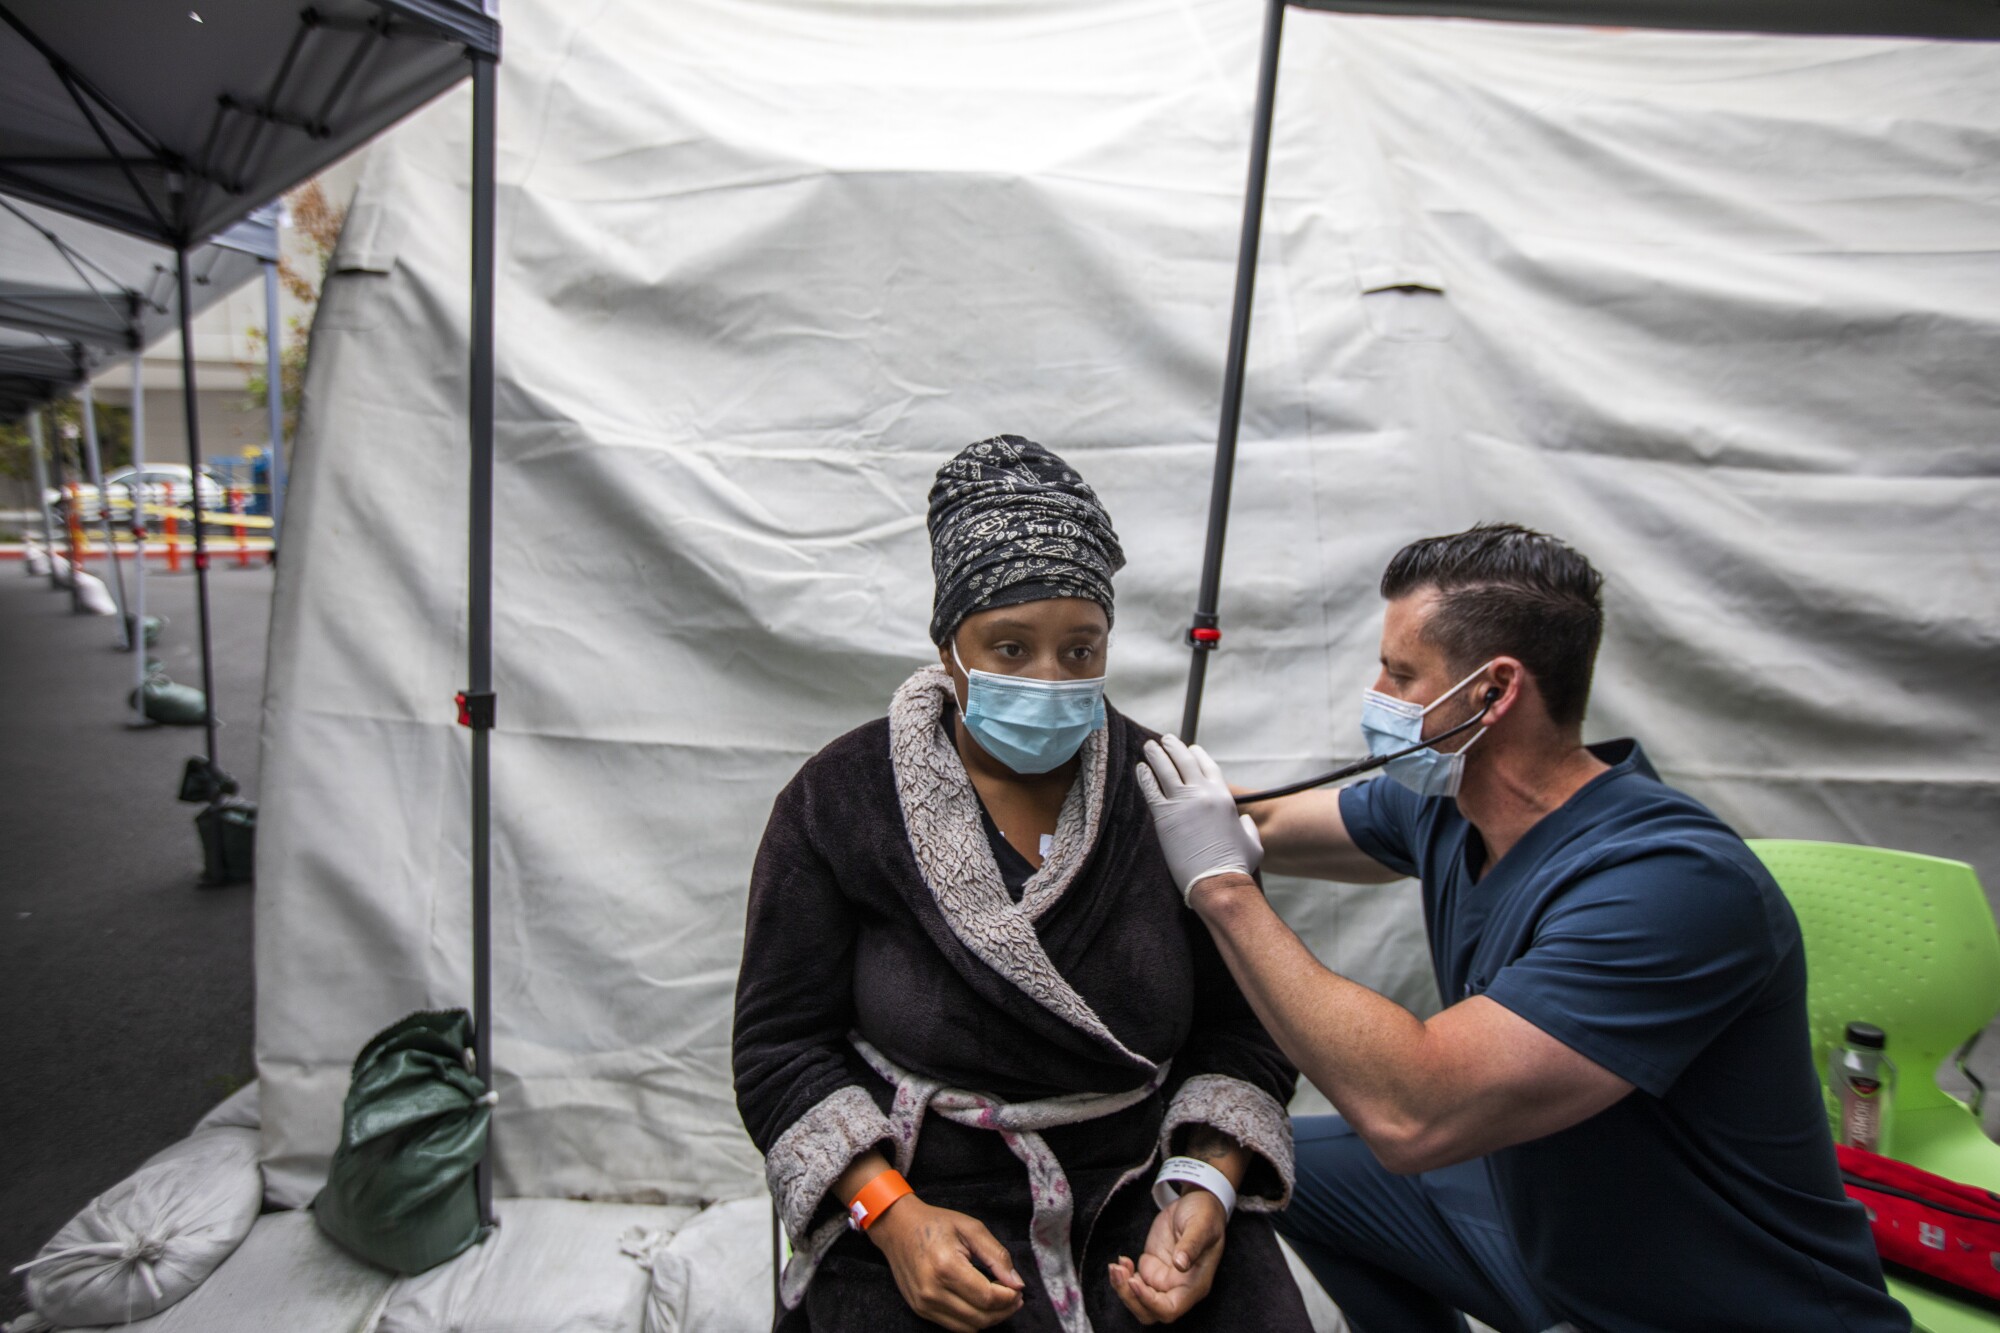 A doctor uses a stethoscope on a patient inside a tent